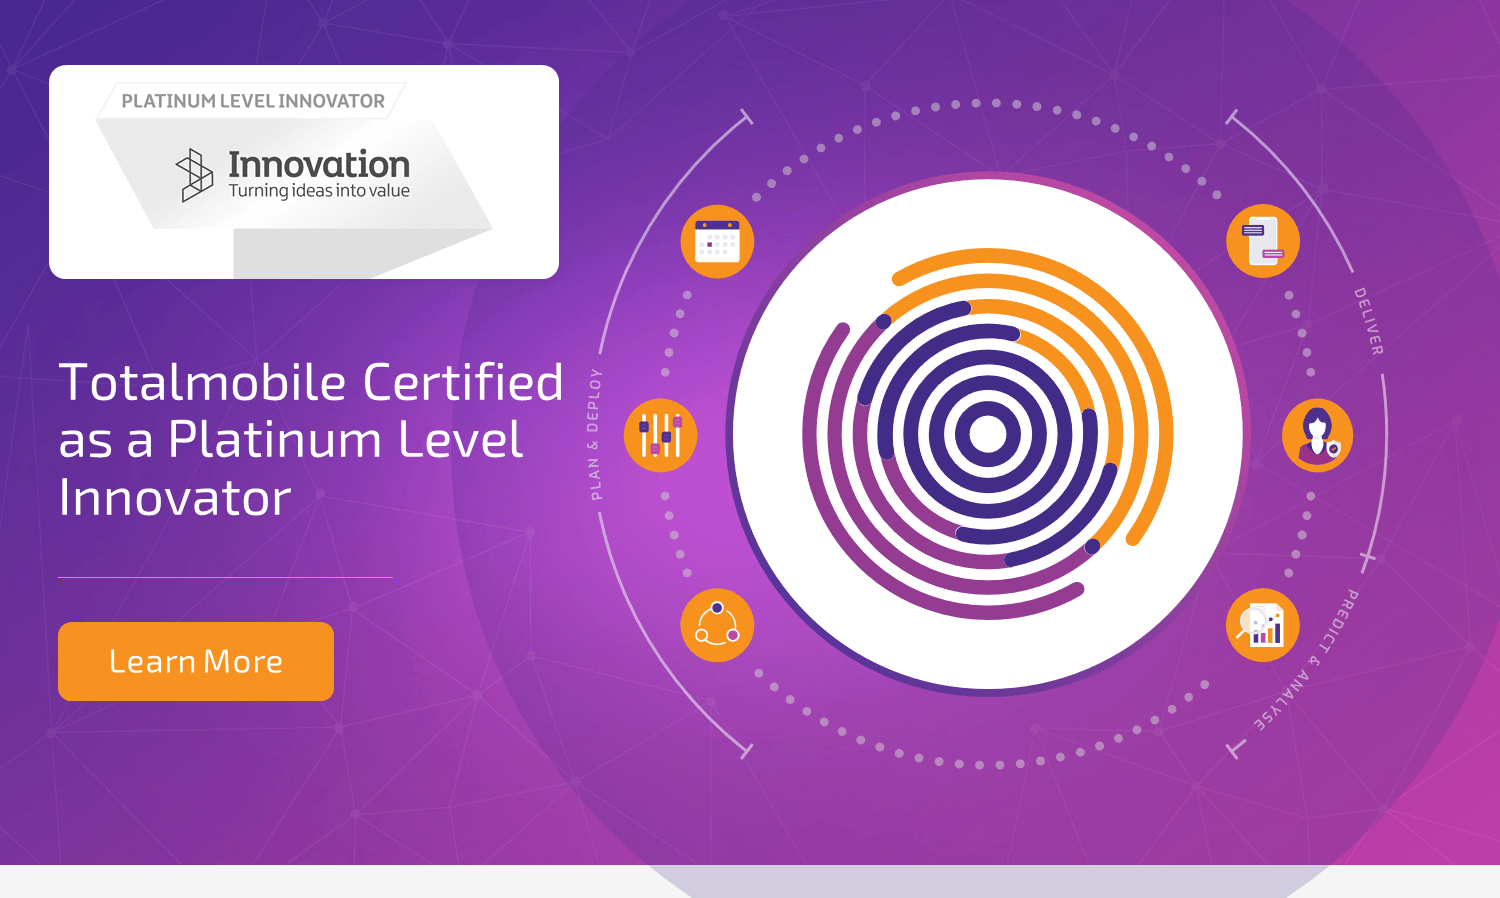 Totalmobile Certified as a Platinum Level Innovator